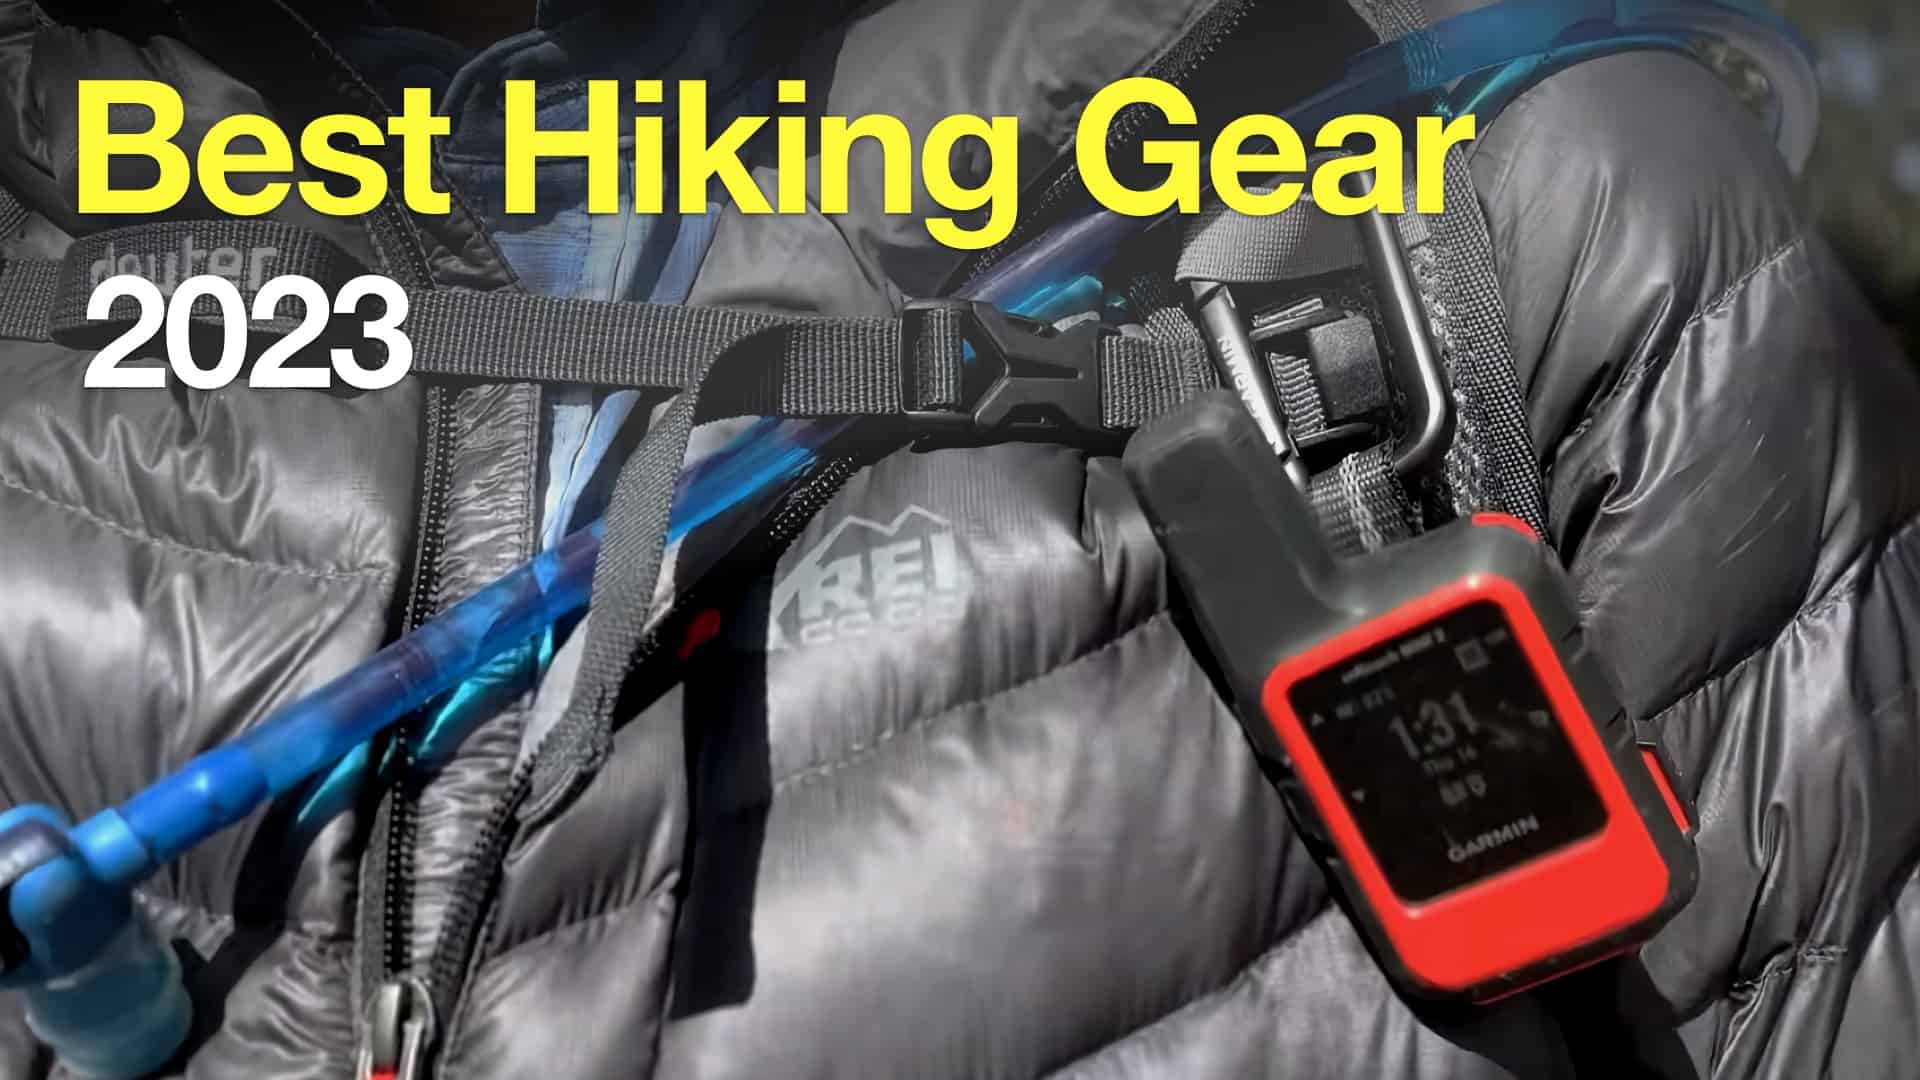 The Best Tested and Recommended Gear of 2023